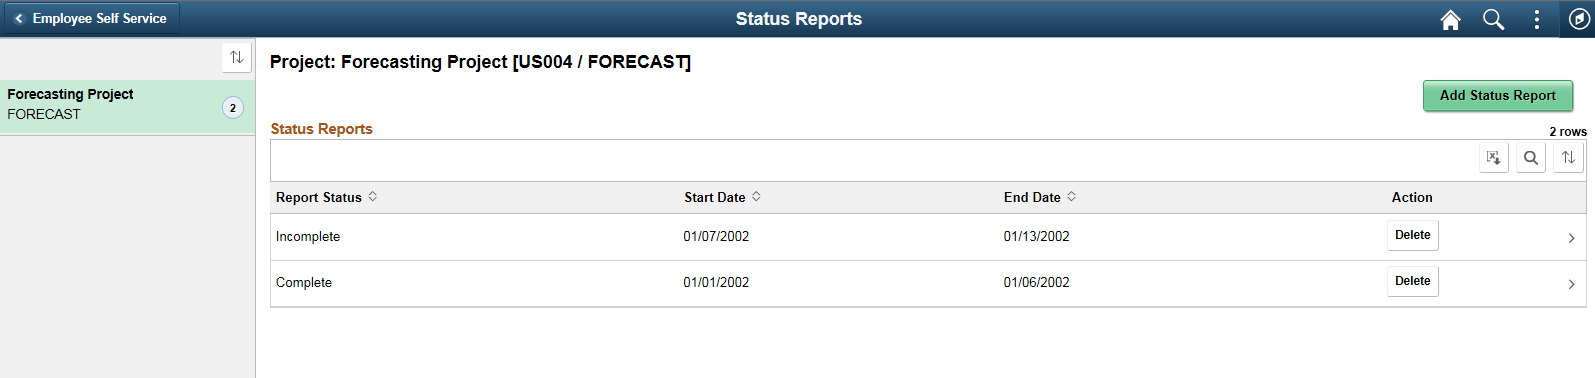 Status Reports page